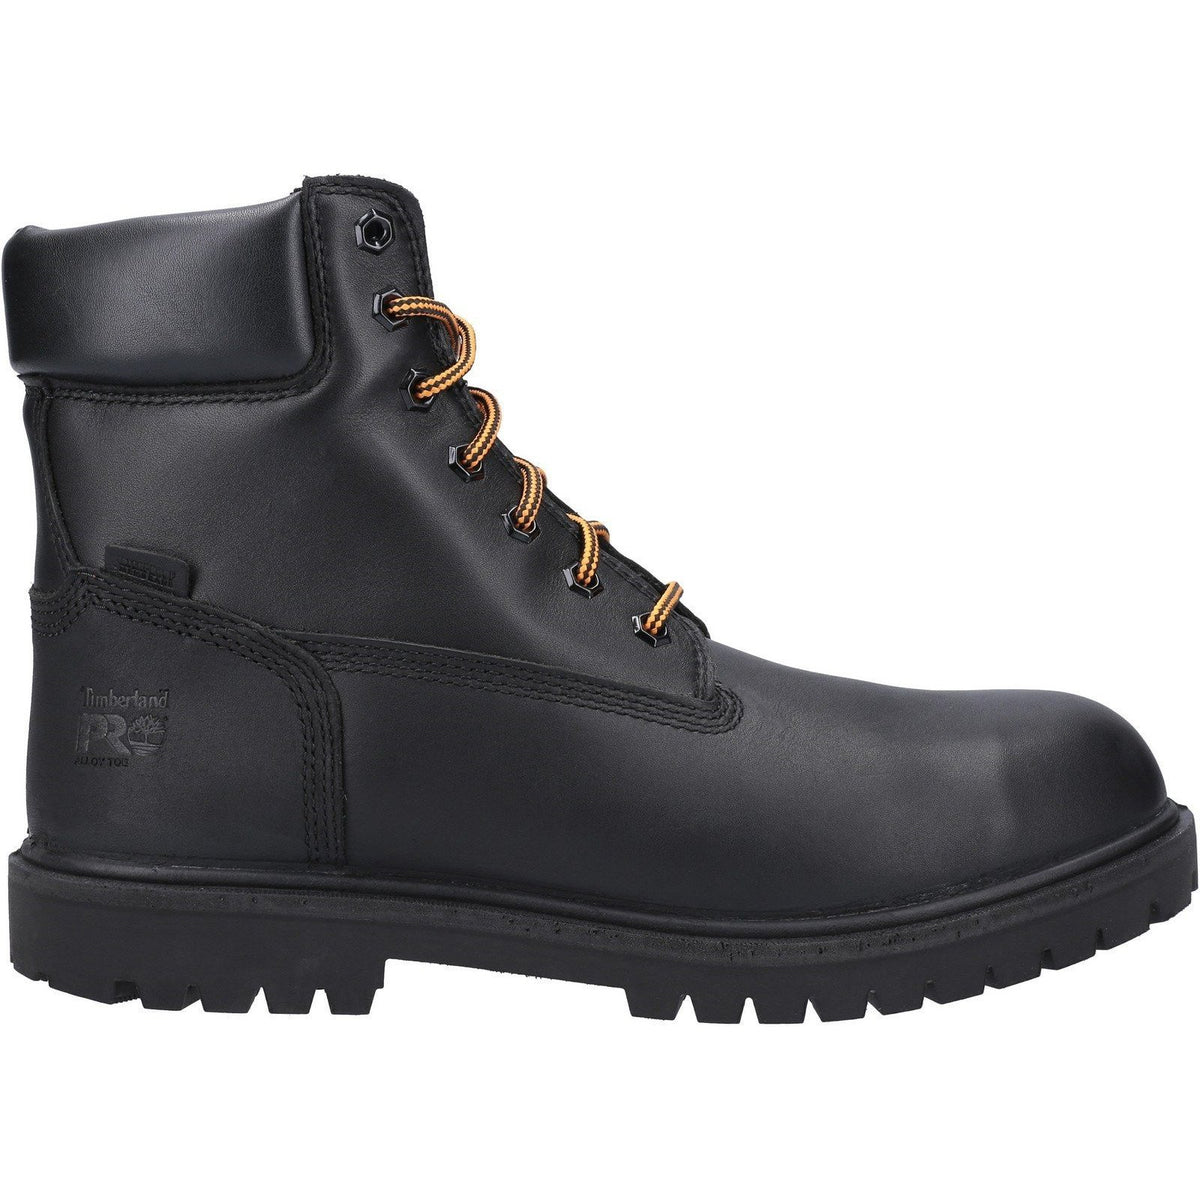 Timberland Pro Iconic Safety Work Boot With Metal Toe Cap - Black